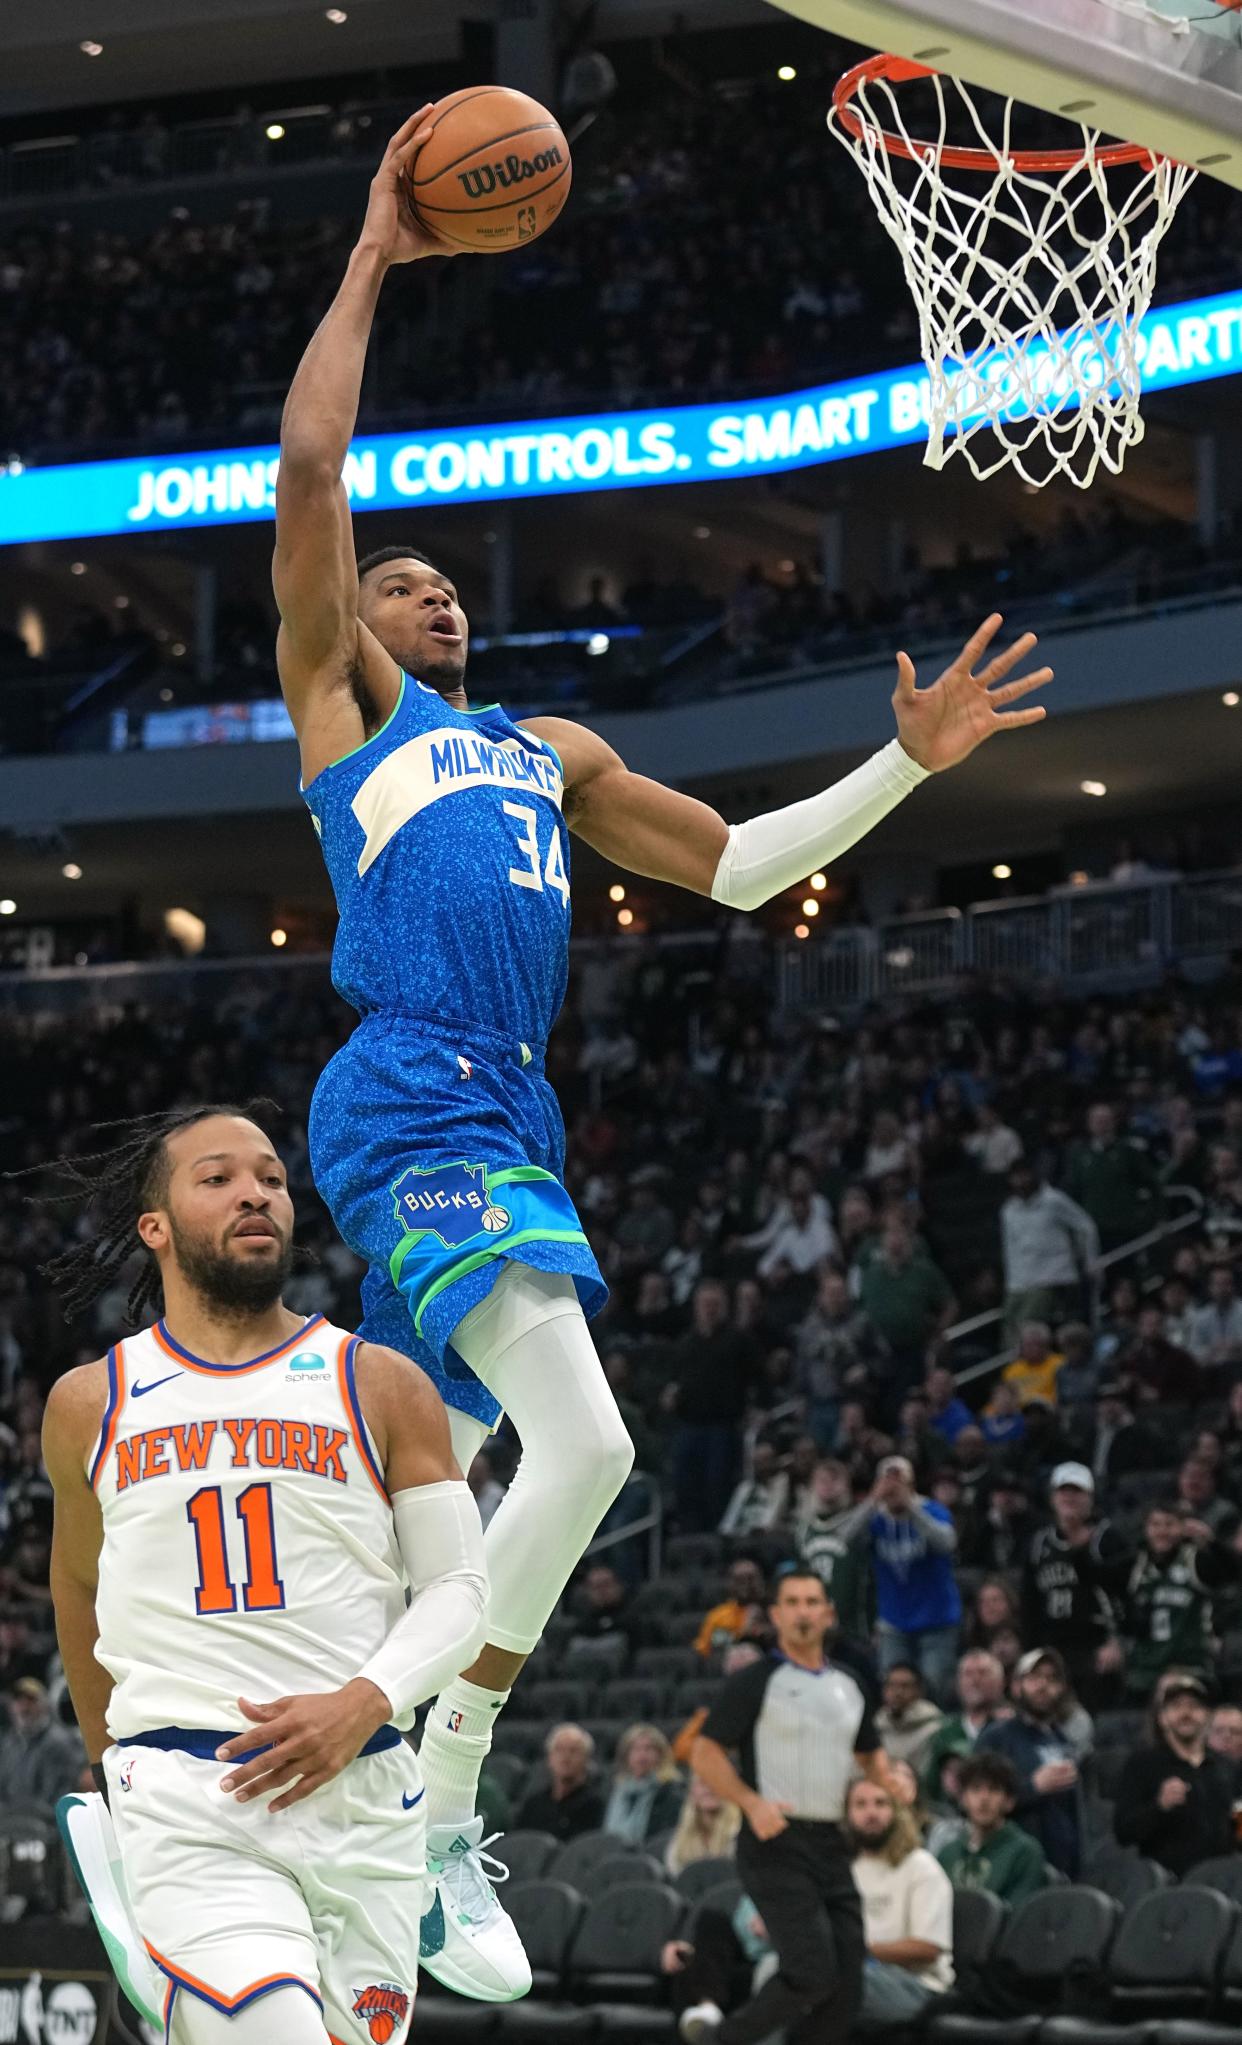 Giannis Antetokounmpo and the Milwaukee Bucks look to soar past the competition in Las Vegas for the conclusion of the NBA's In-Season Tournament. The Bucks defeated the New York Knicks on Tuesday in the quarterfinals to advance to the semifinals against the Indiana Pacers.